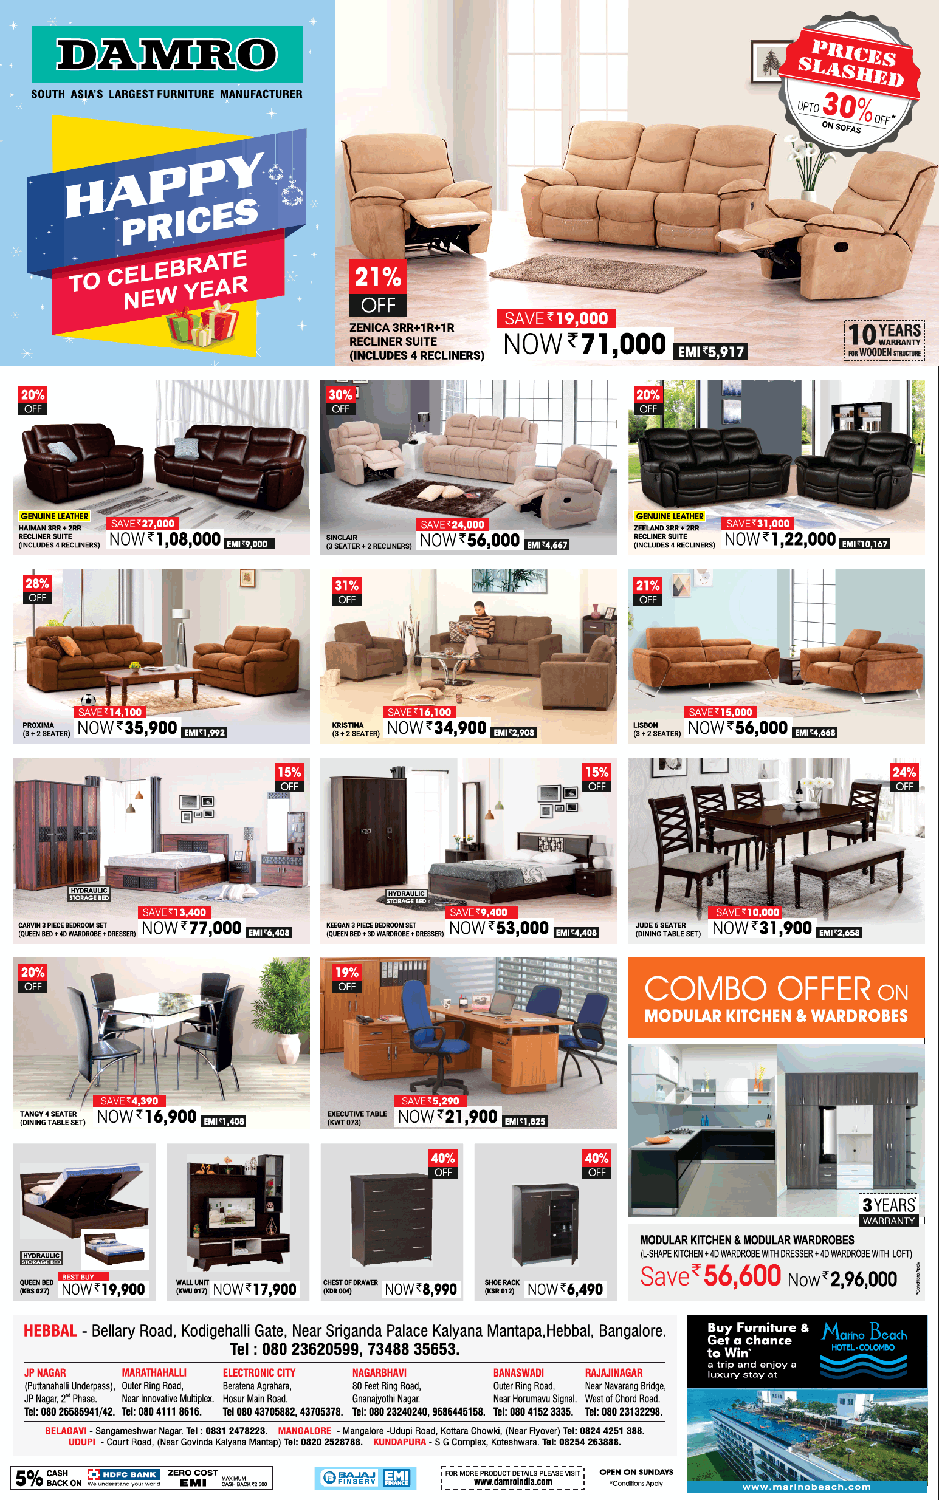 damro-furniture-happy-prices-to-celebrate-new-year-ad-times-of-india-bangalore-05-01-2019.png